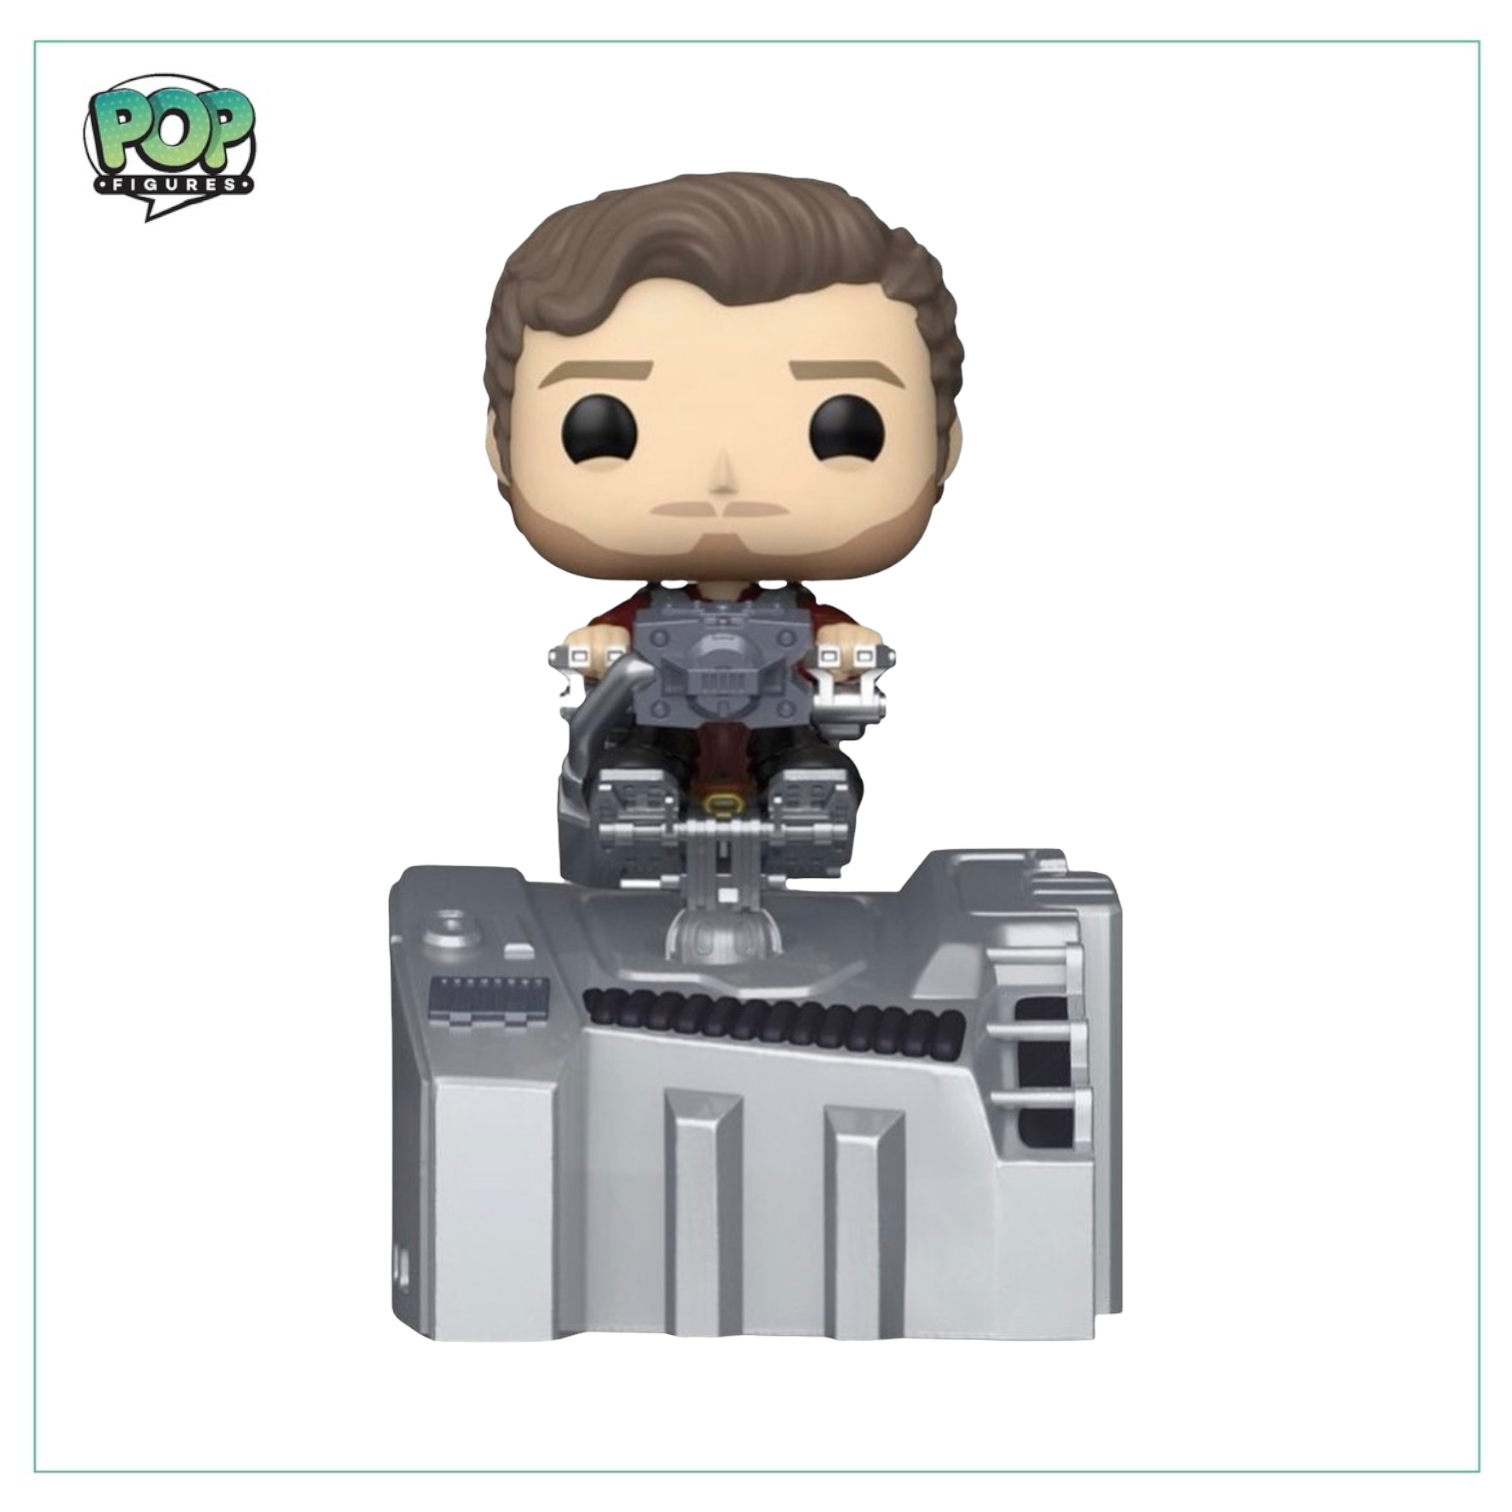 Star Lord #1021 Funko Pop! Rides Guardians of the Galaxy - Walmart Exclusive